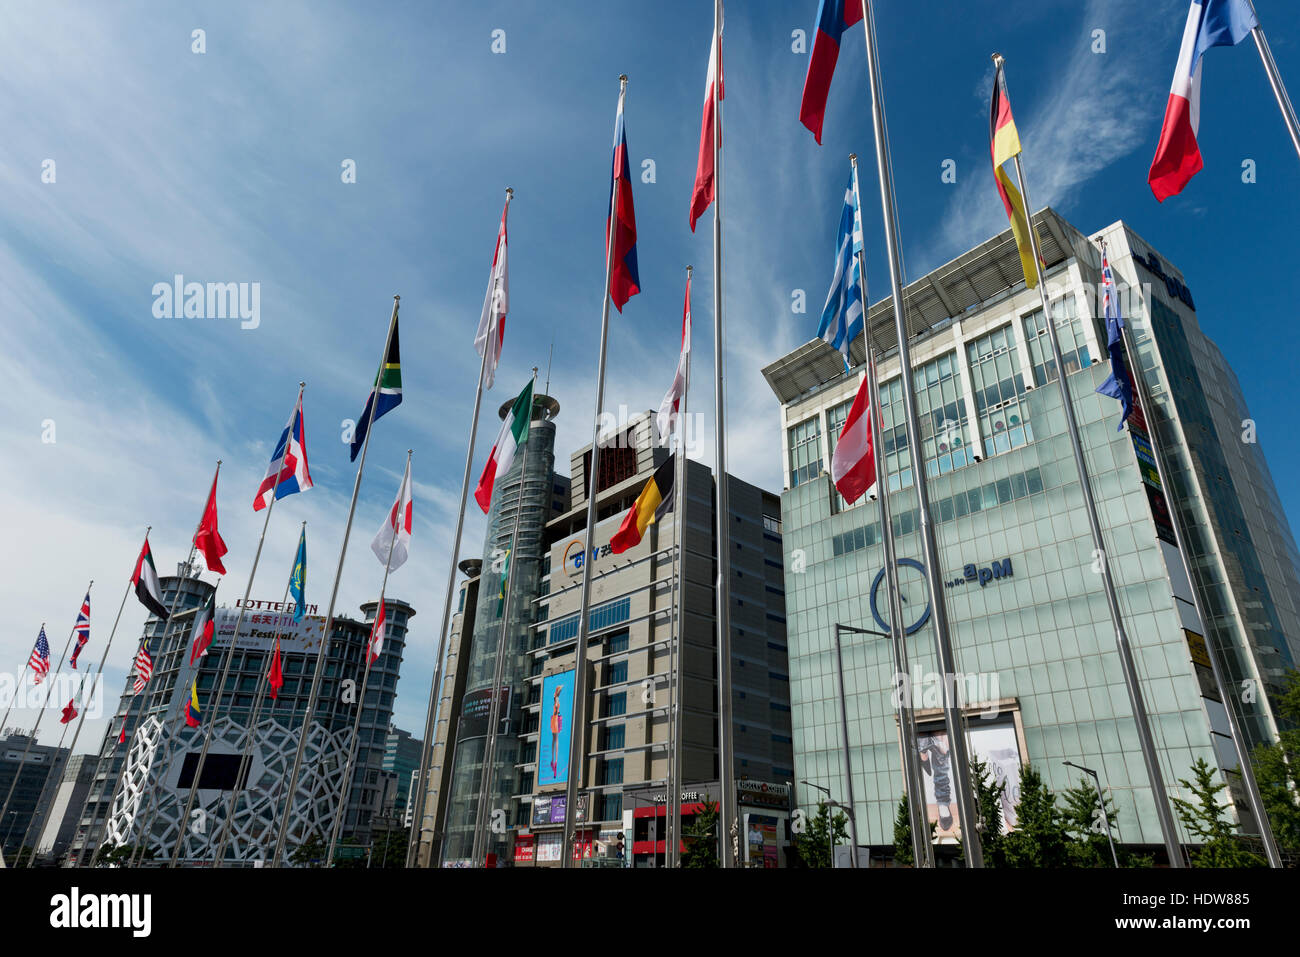 Modern buildings with digital screens for advertising and international flags on poles in a row; Seoul, South Korea Stock Photo